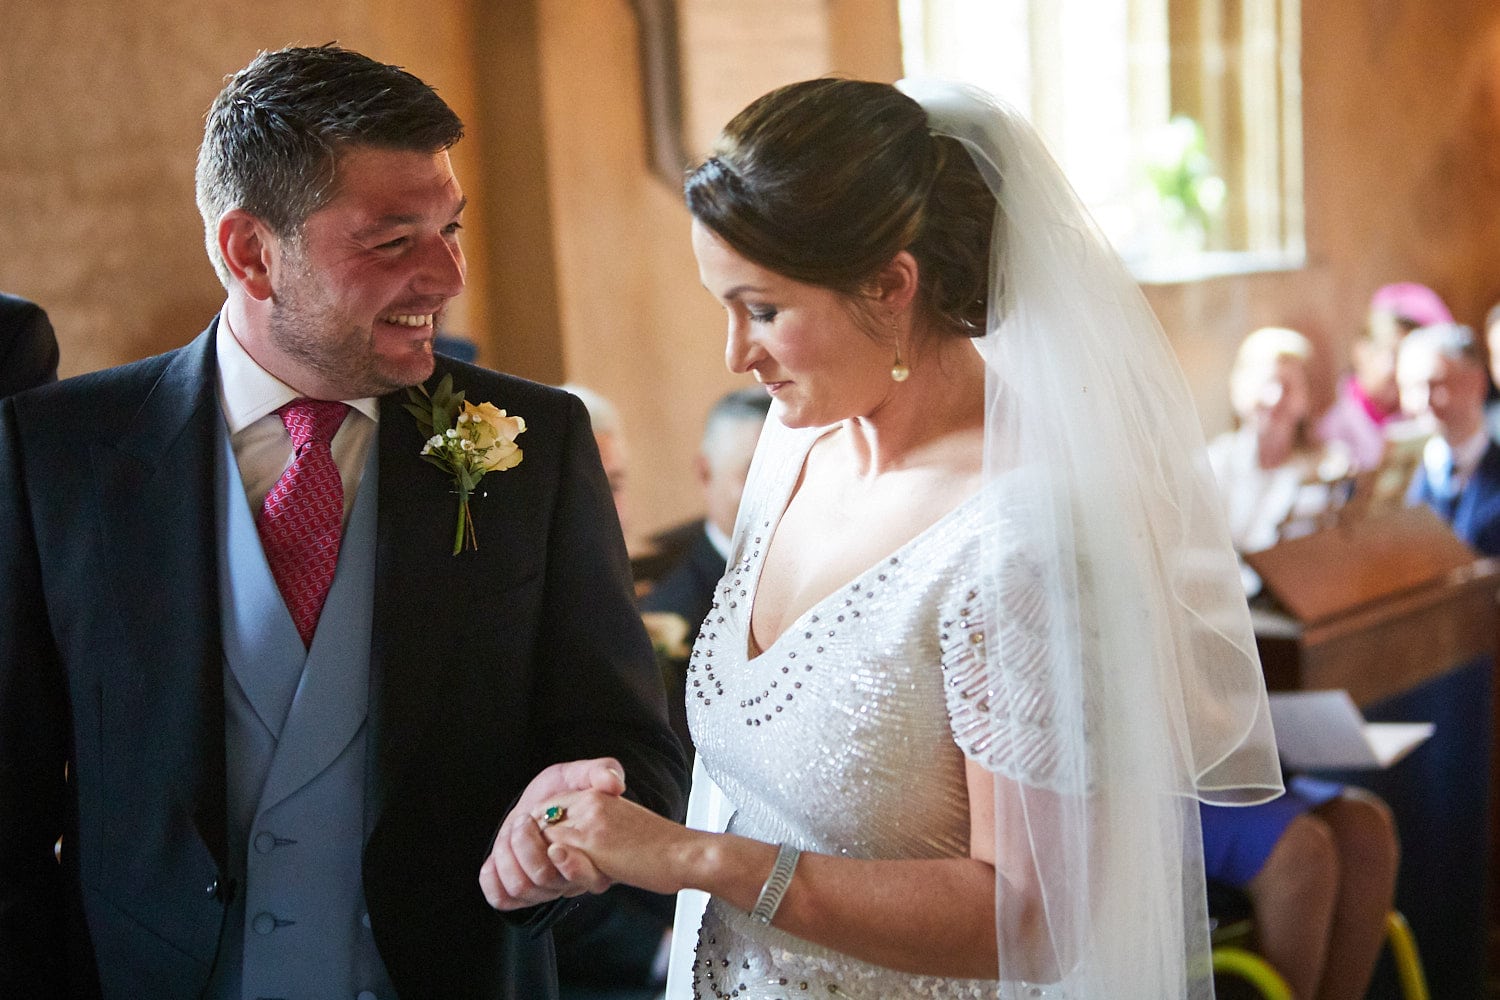 A groom smiles as he looks at his wife lovingly after they exchanged rings on their wedding day